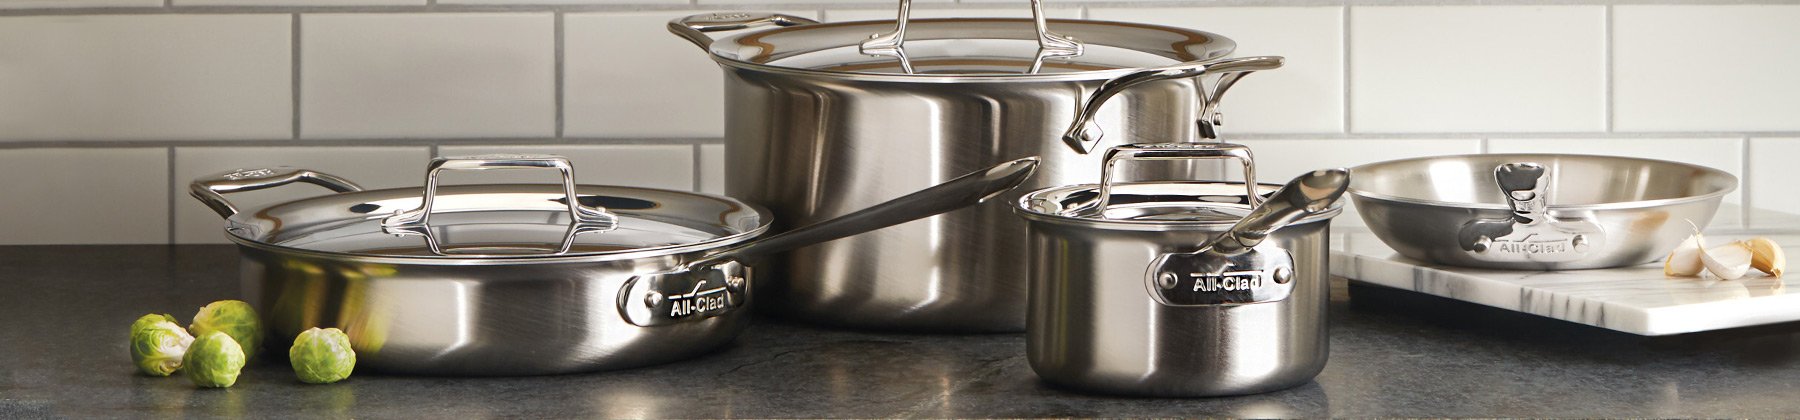 Photo of All-Clad Stainless Steel Cookware.